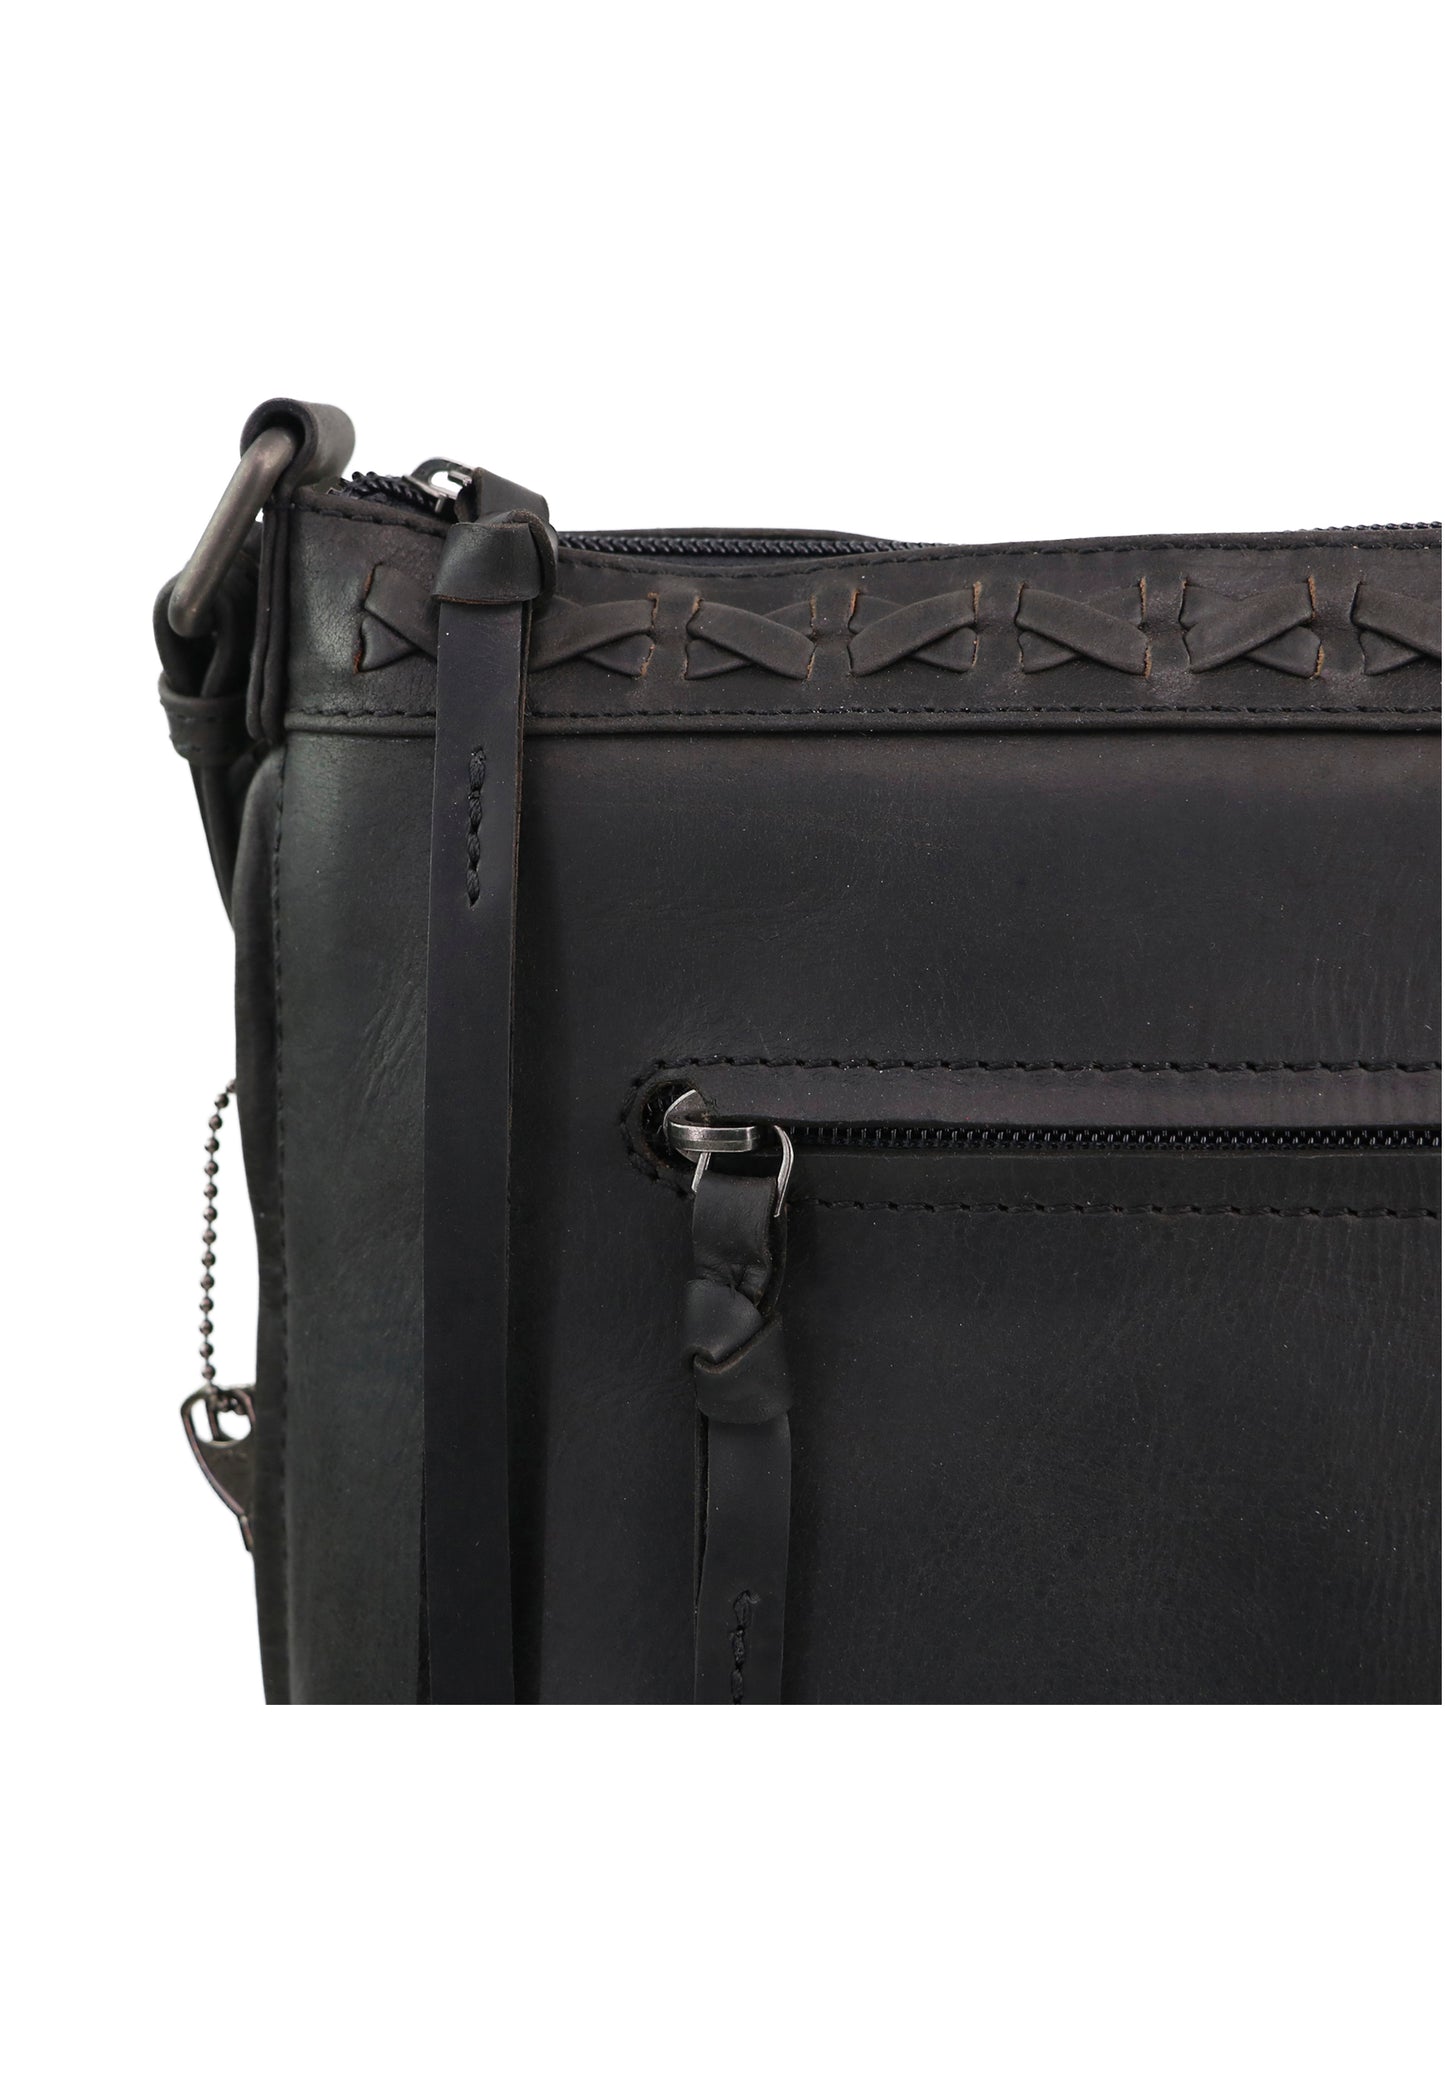 Ckloseup detail view of leather concealed carry purse